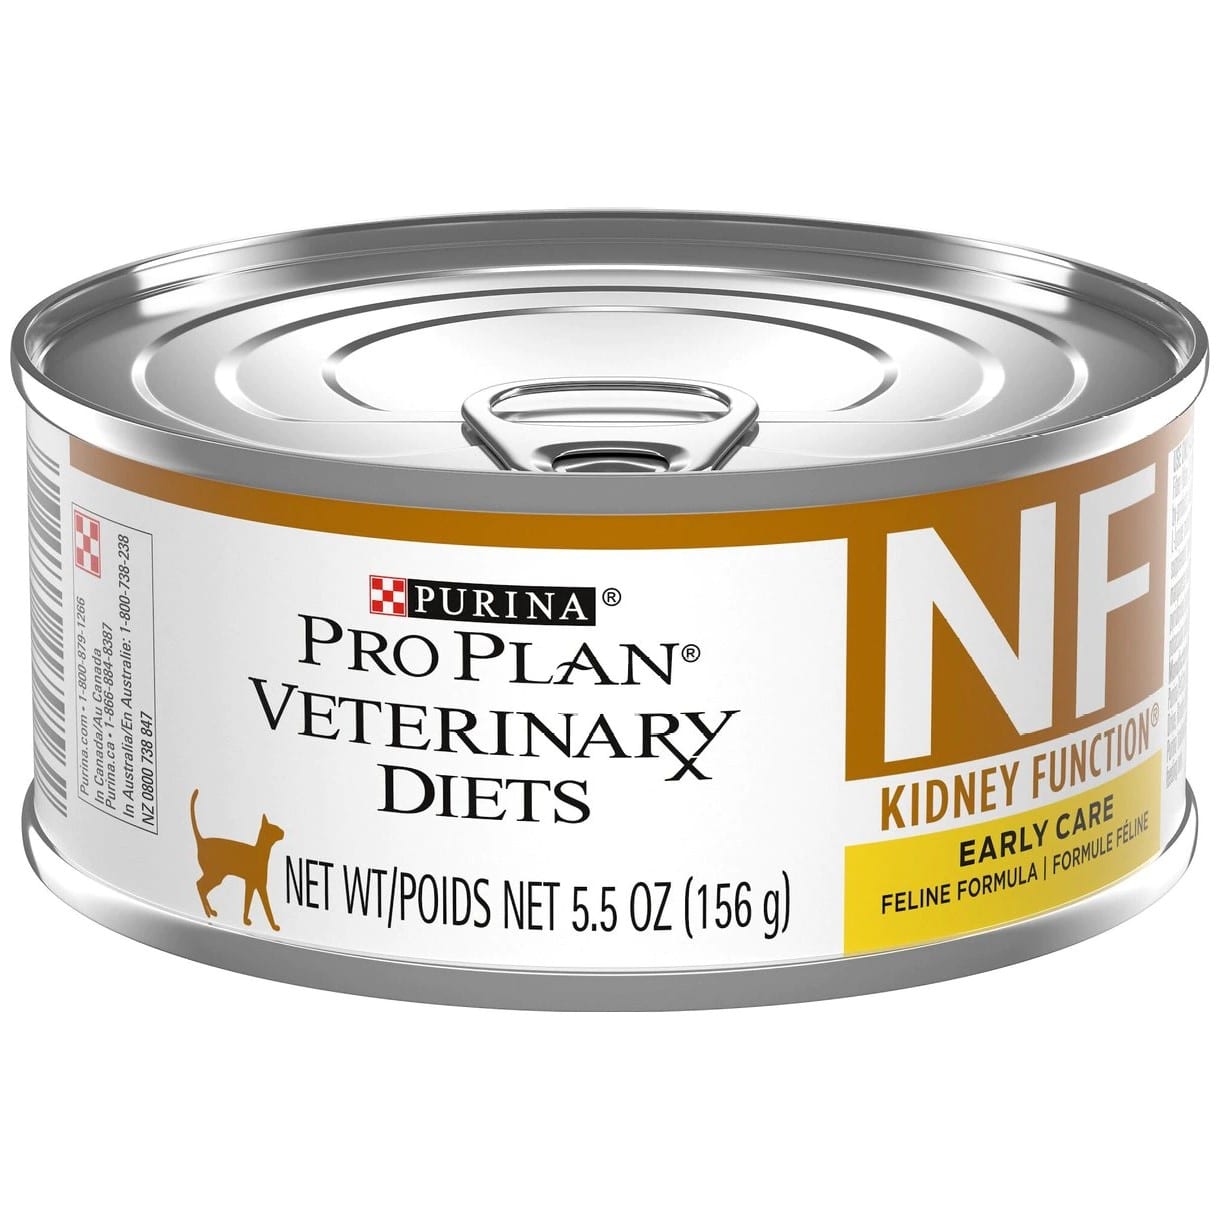 Purina Pro Plan Veterinary Diets NF Kidney Function Early Care Wet Cat Food